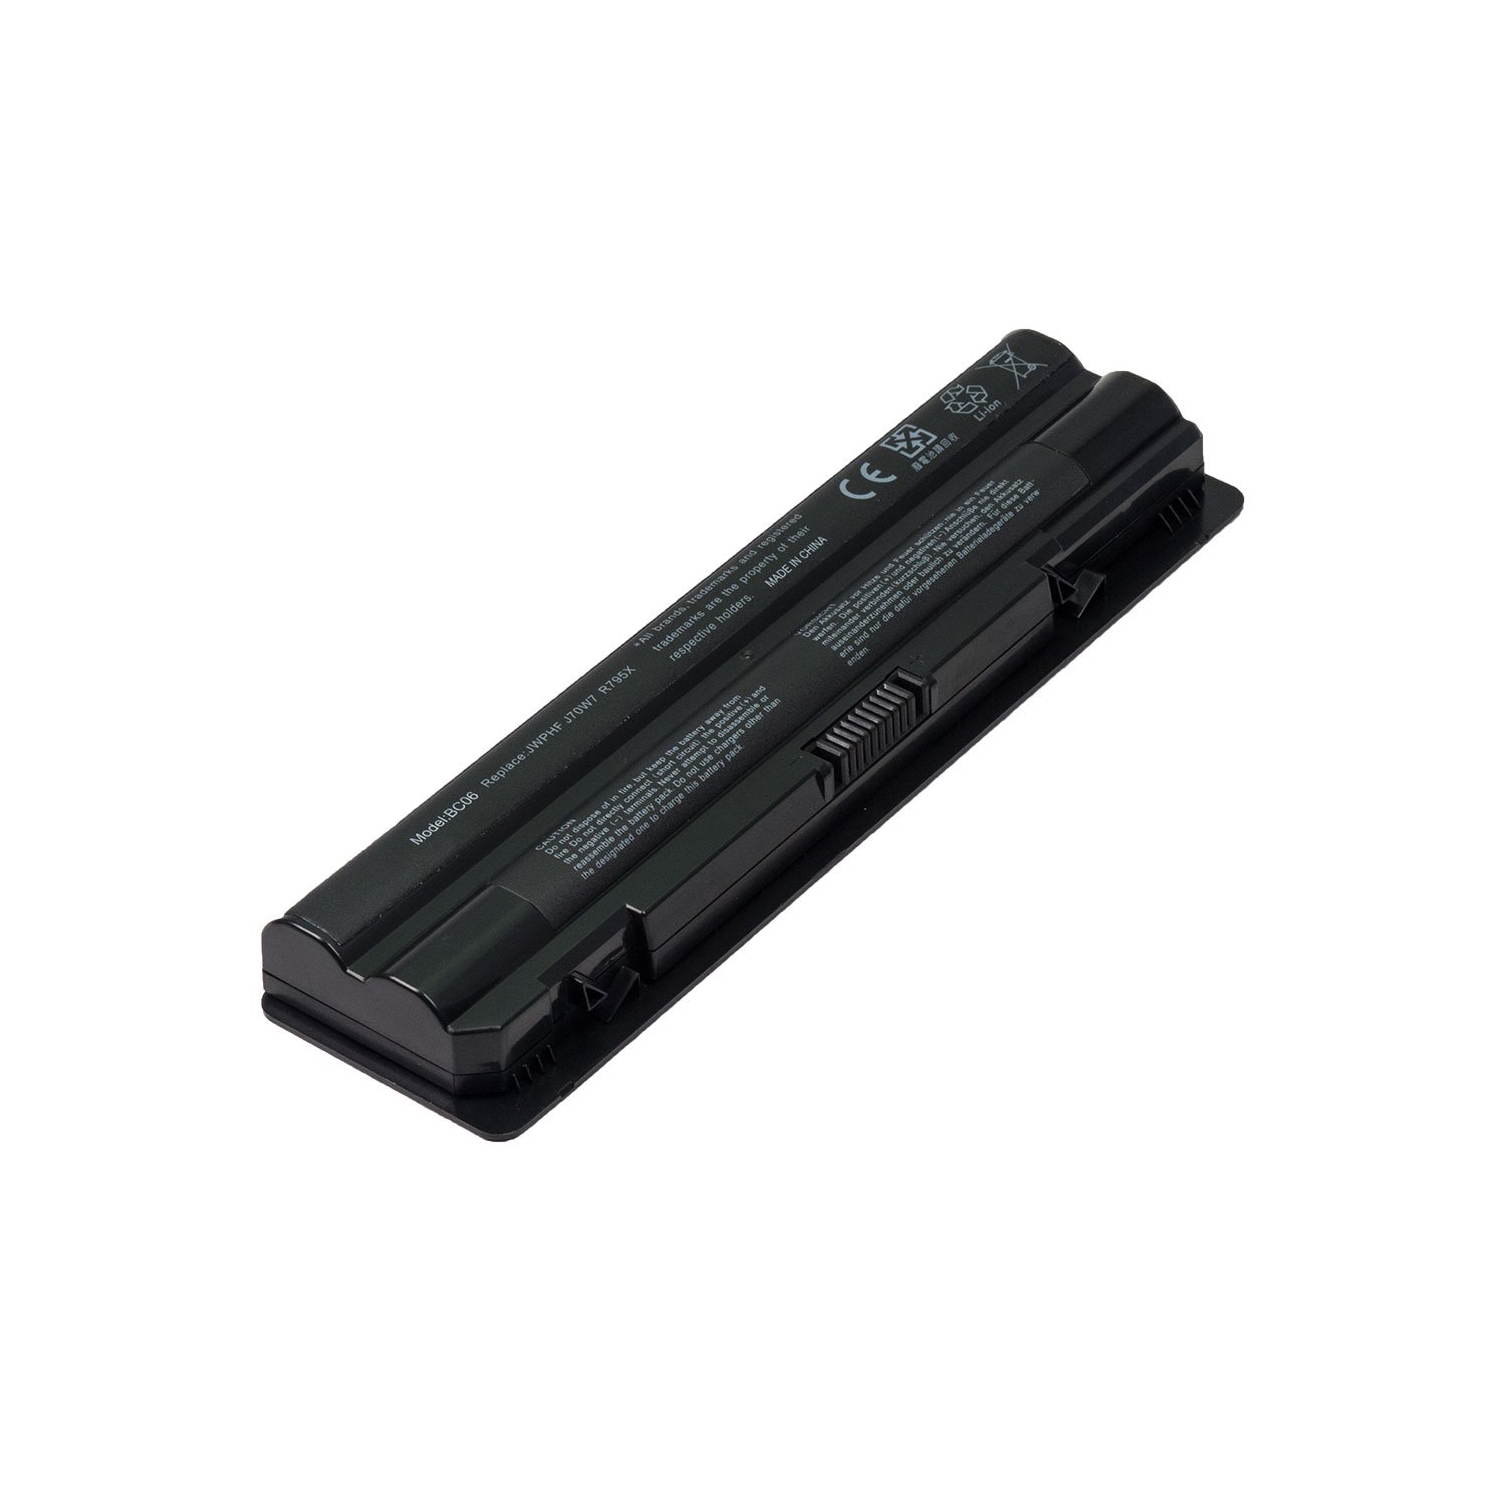 BattDepot: Laptop Battery for Dell J70W7, 8PGNG, 991T2021F, AHA63226277, P09E001, P12G, WHXY3, XPS 14, XPS 15, XPS 17